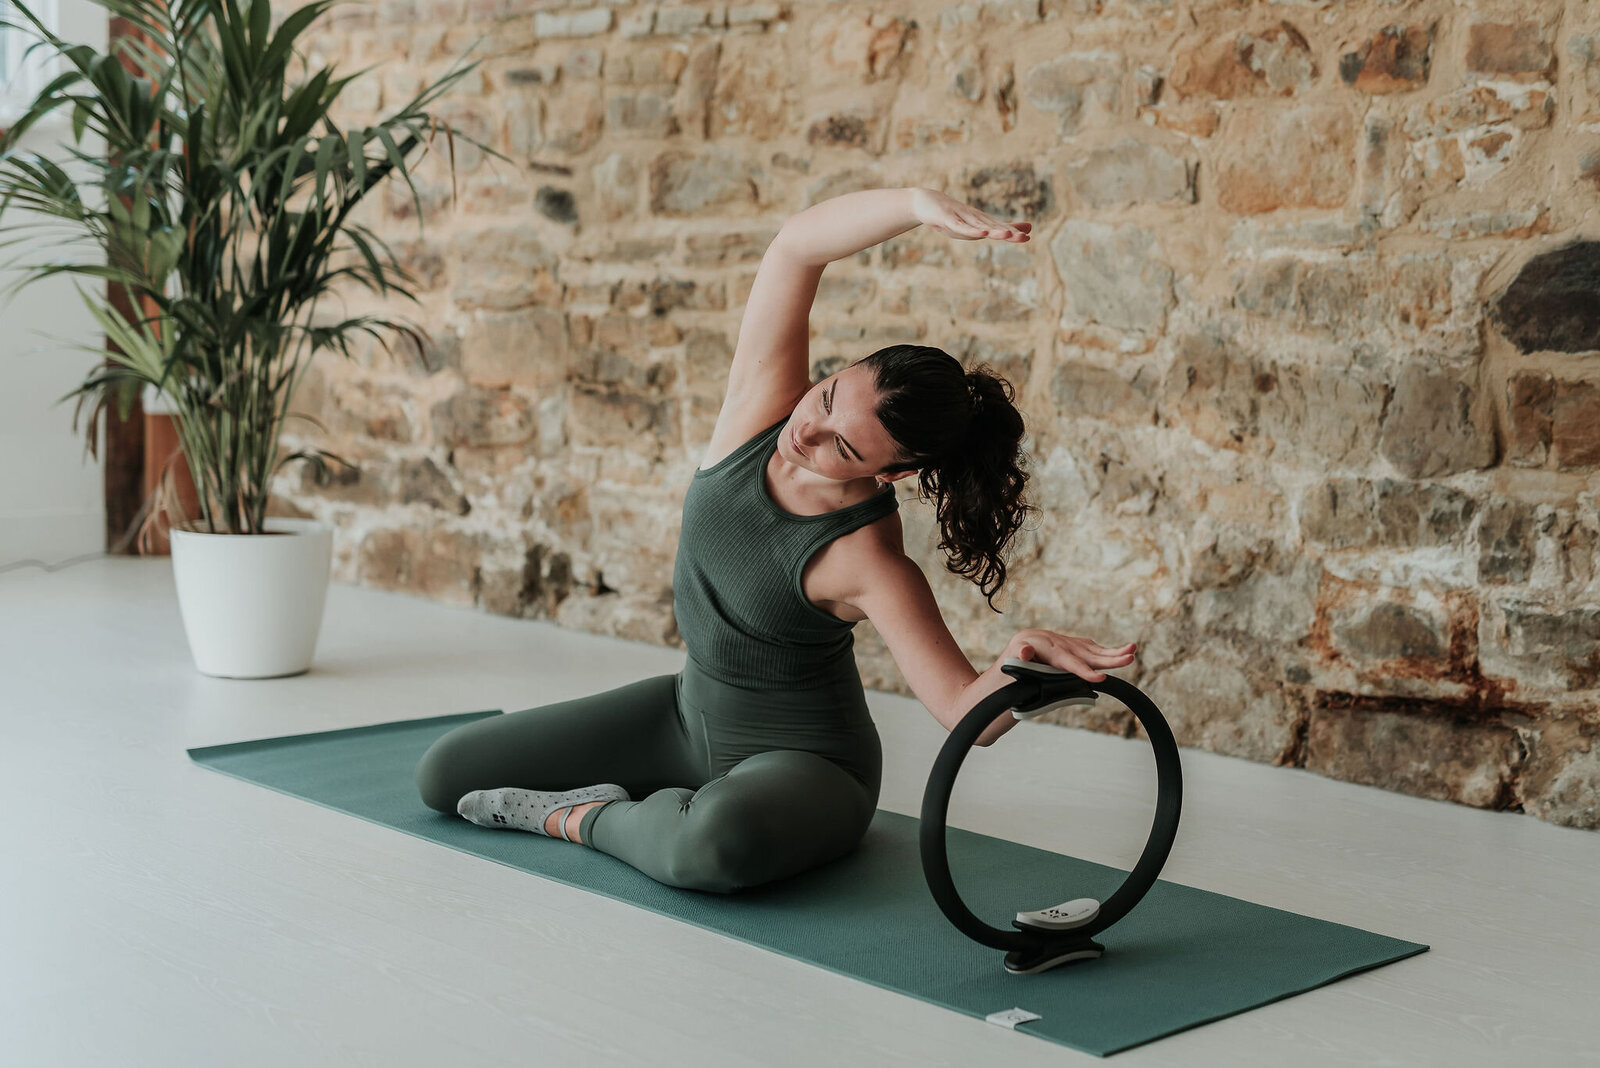 Female pilates instructor demonstrating pilates exercise using a resistance circle